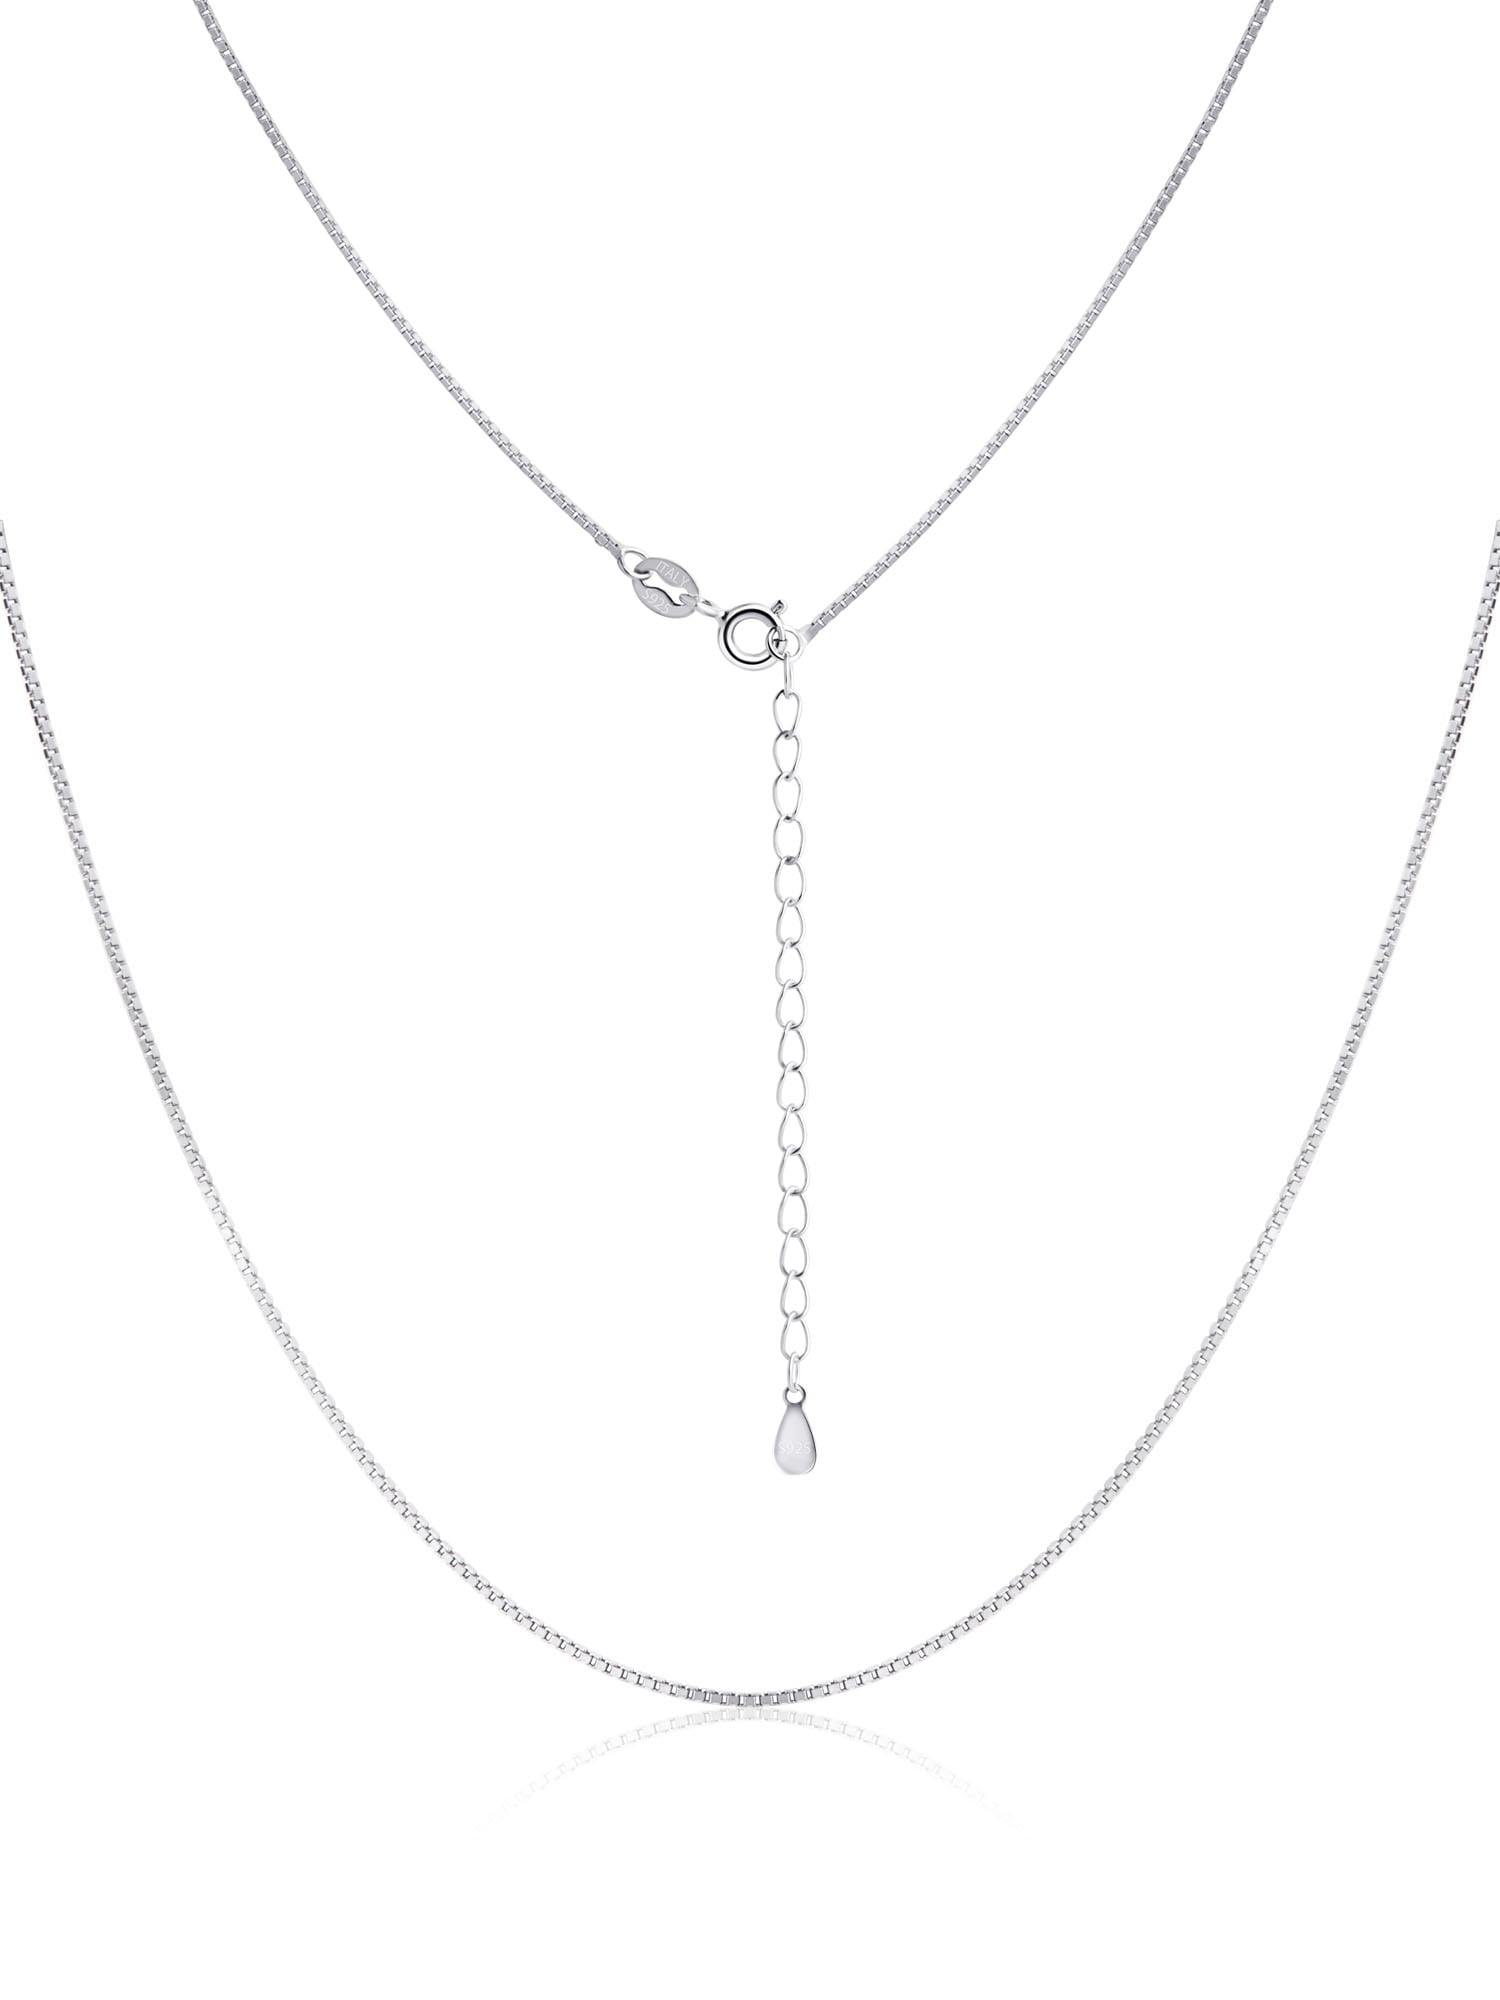 Details about   STERLING SILVER CURB SINGAPORE CHAIN 16 18 20 22 24 TWISTED PENDANT NECKLACE BOX